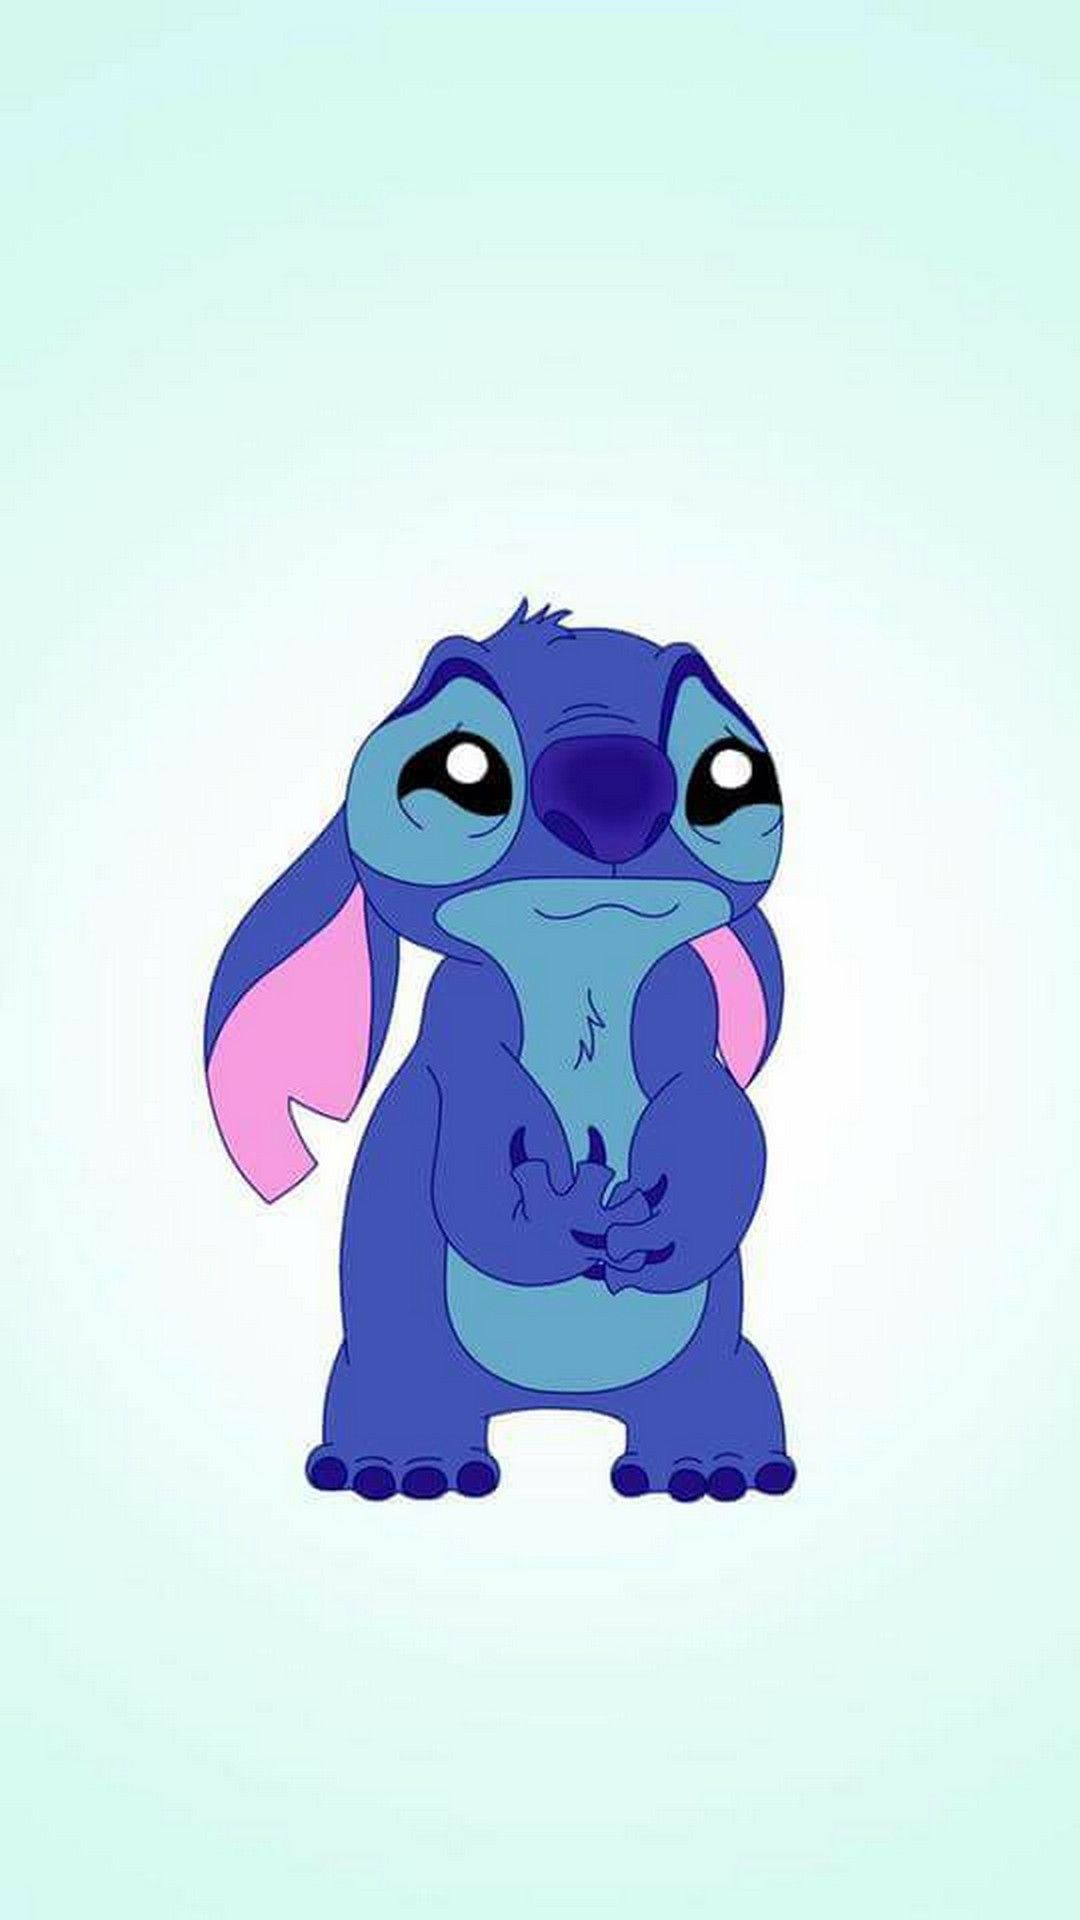 Stitch Wallpaper For Mobile Android Cute Wallpaper